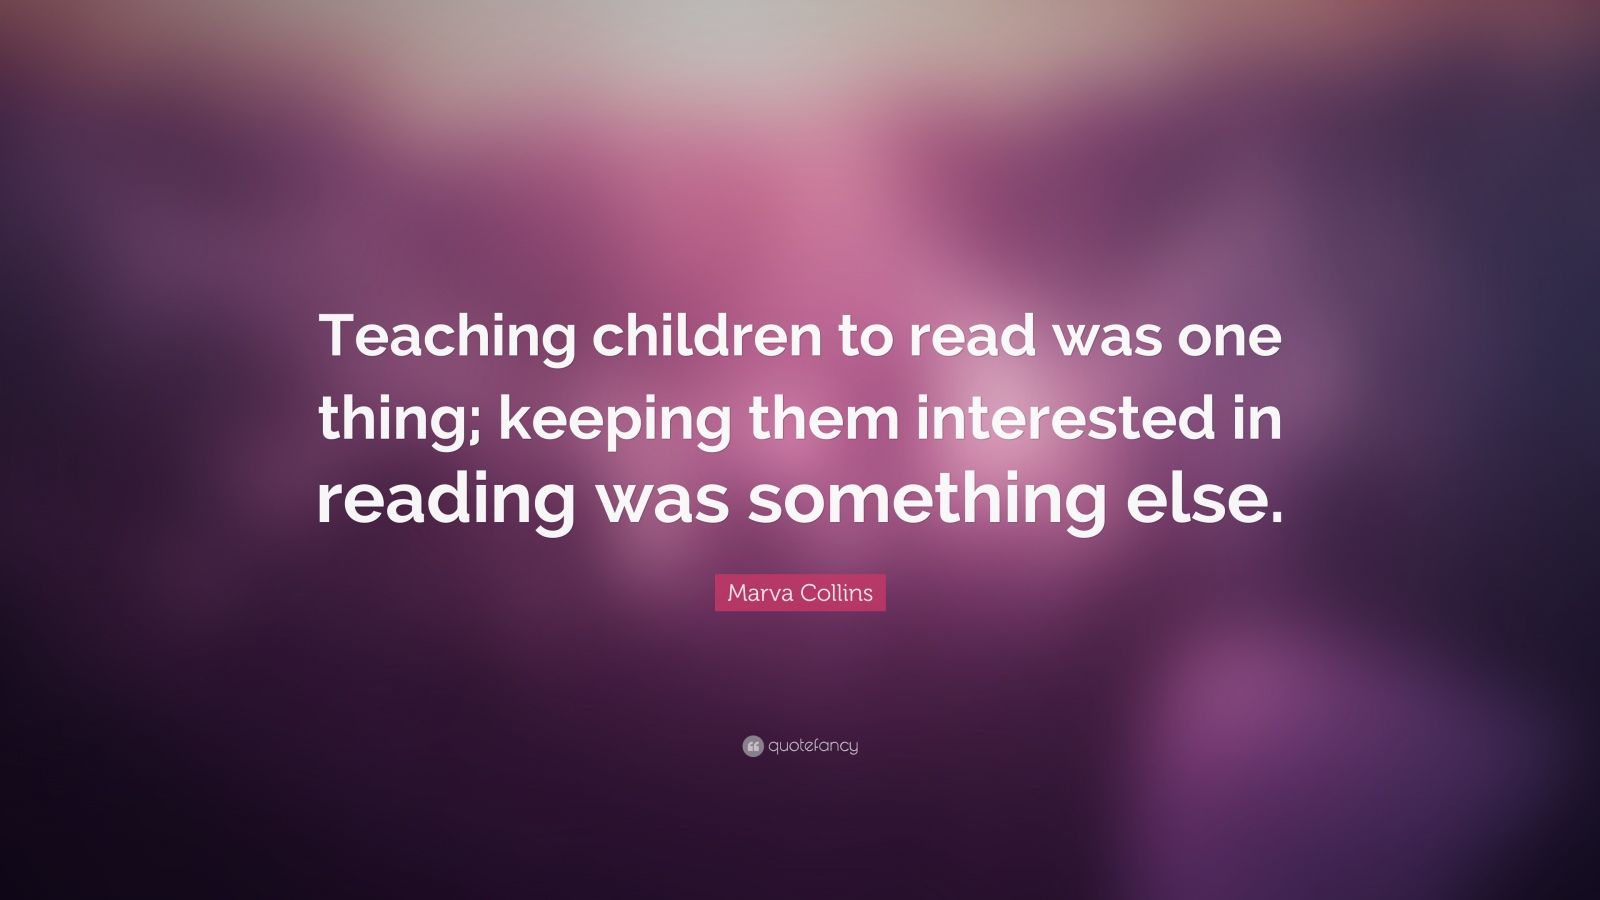 Marva Collins Quote: “Teaching children to read was one thing; keeping